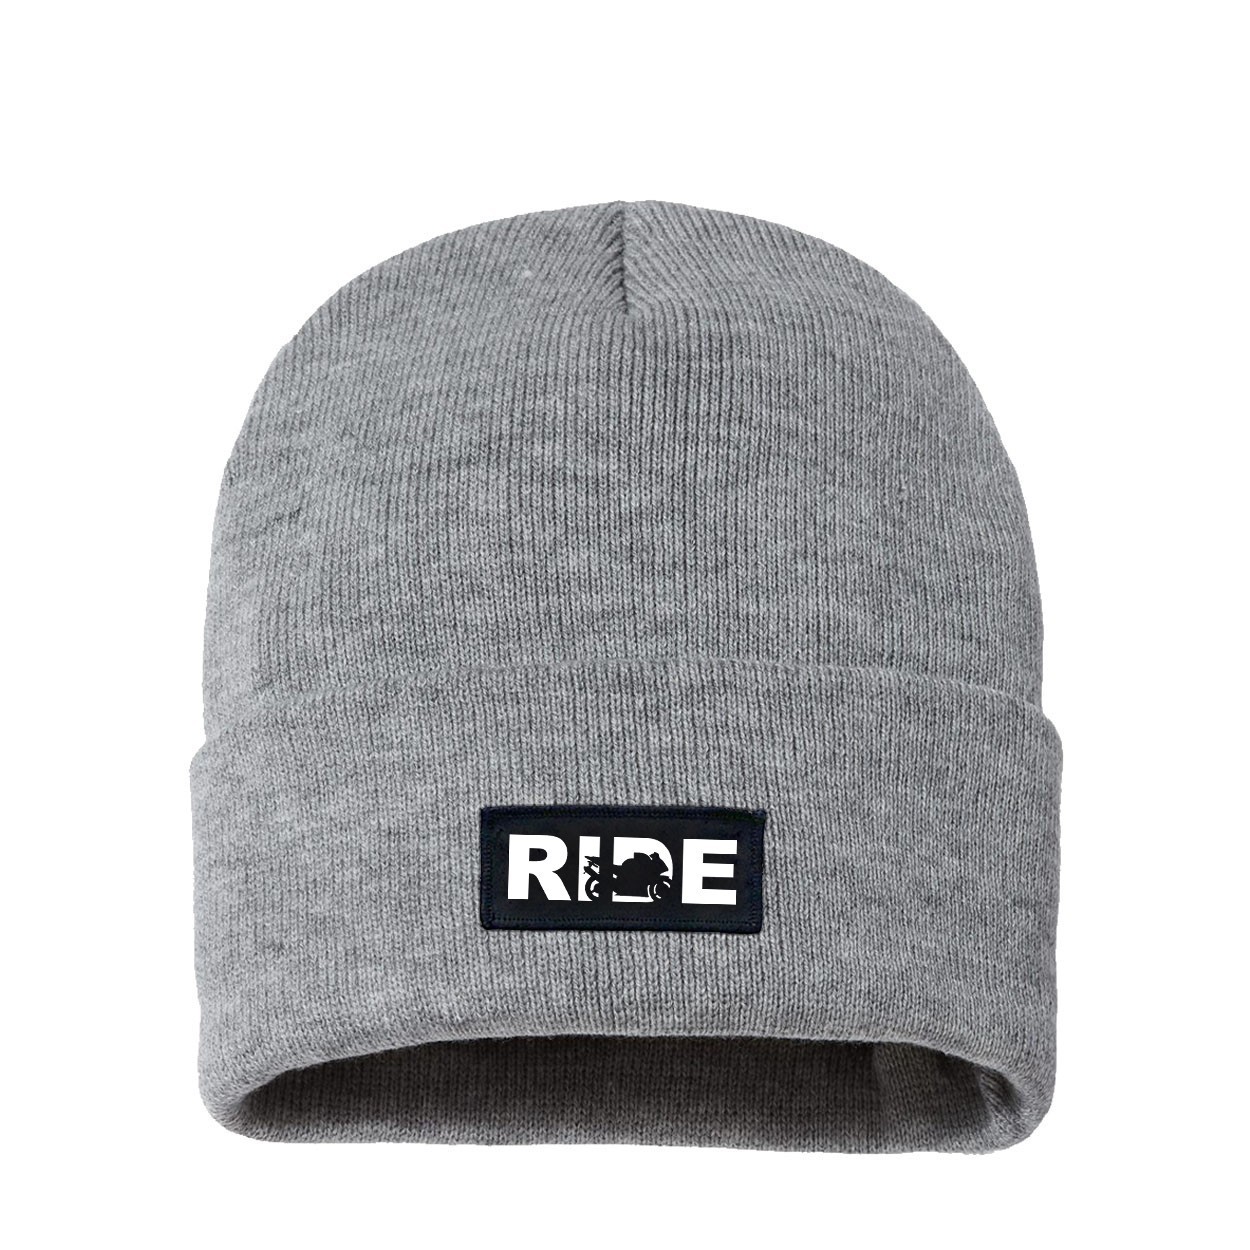 Ride Sport Bike Logo Night Out Woven Patch Night Out Sherpa Lined Cuffed Beanie Heather Gray (White Logo)